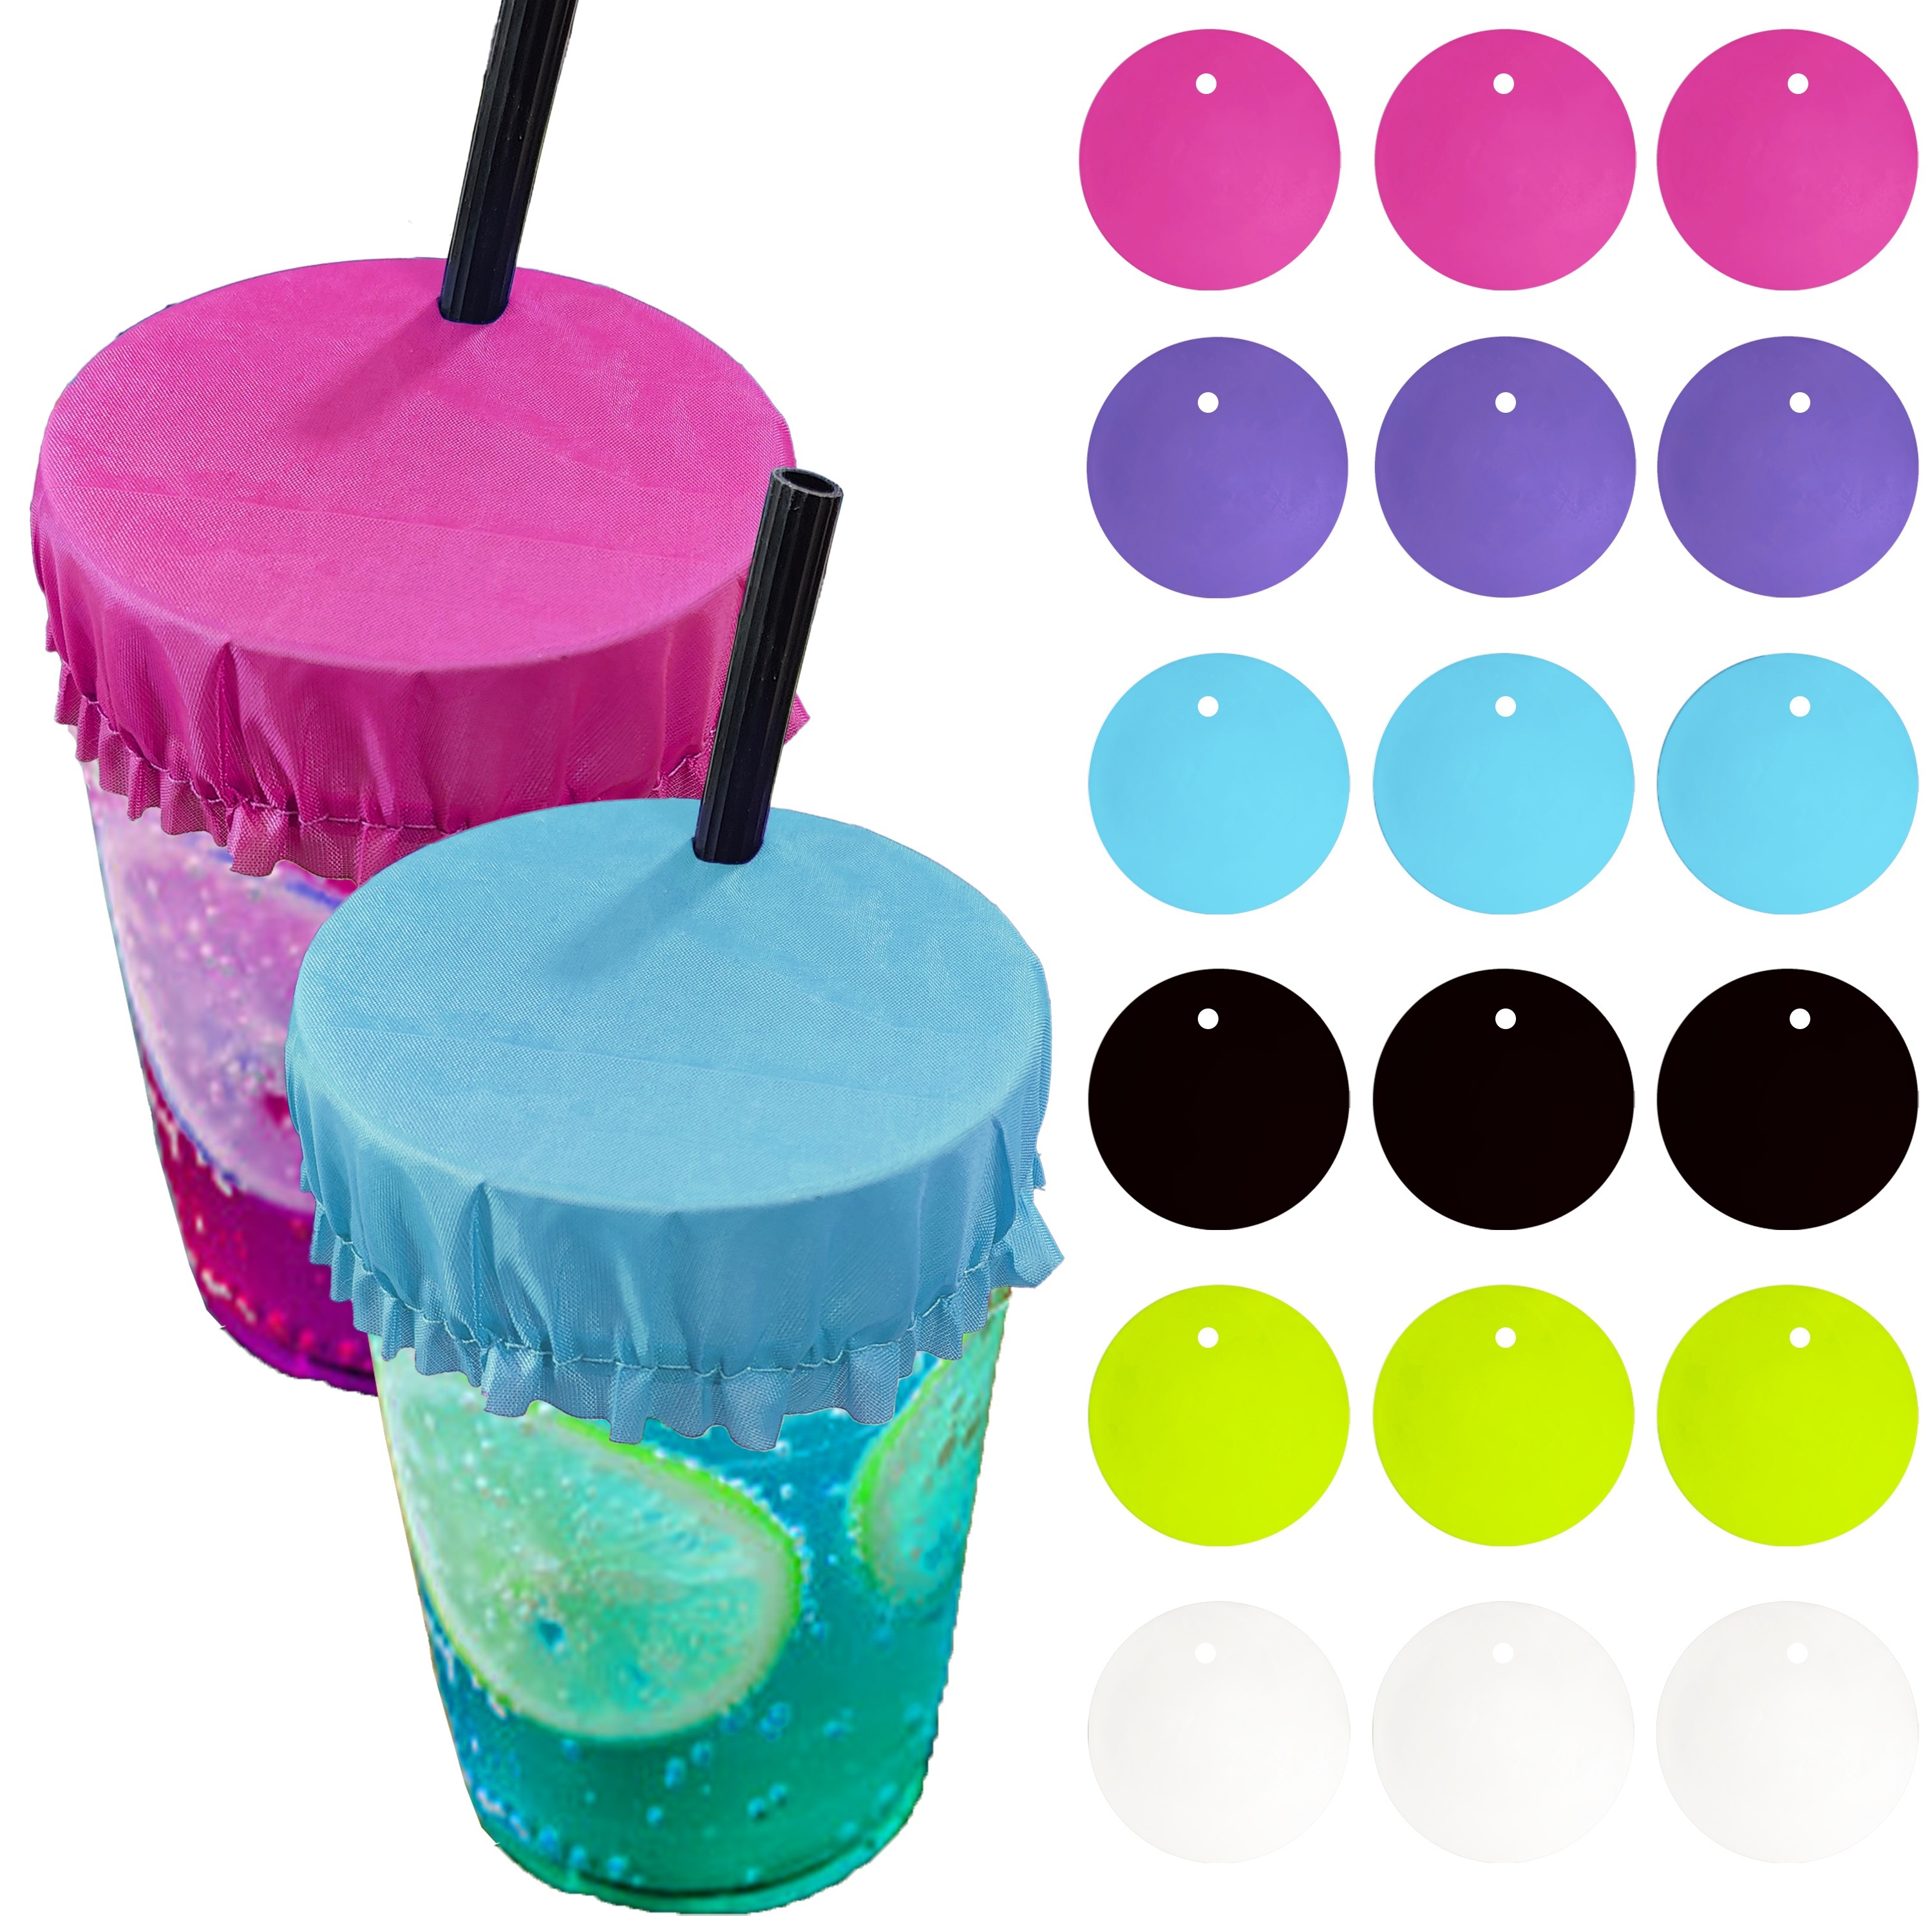 Drink Covers for Alcohol Protection 4-Pack Drink Spiking Prevention with  Straw Hole for Women - Reusable Fabric Cup Cover for Drinks to Keep Out